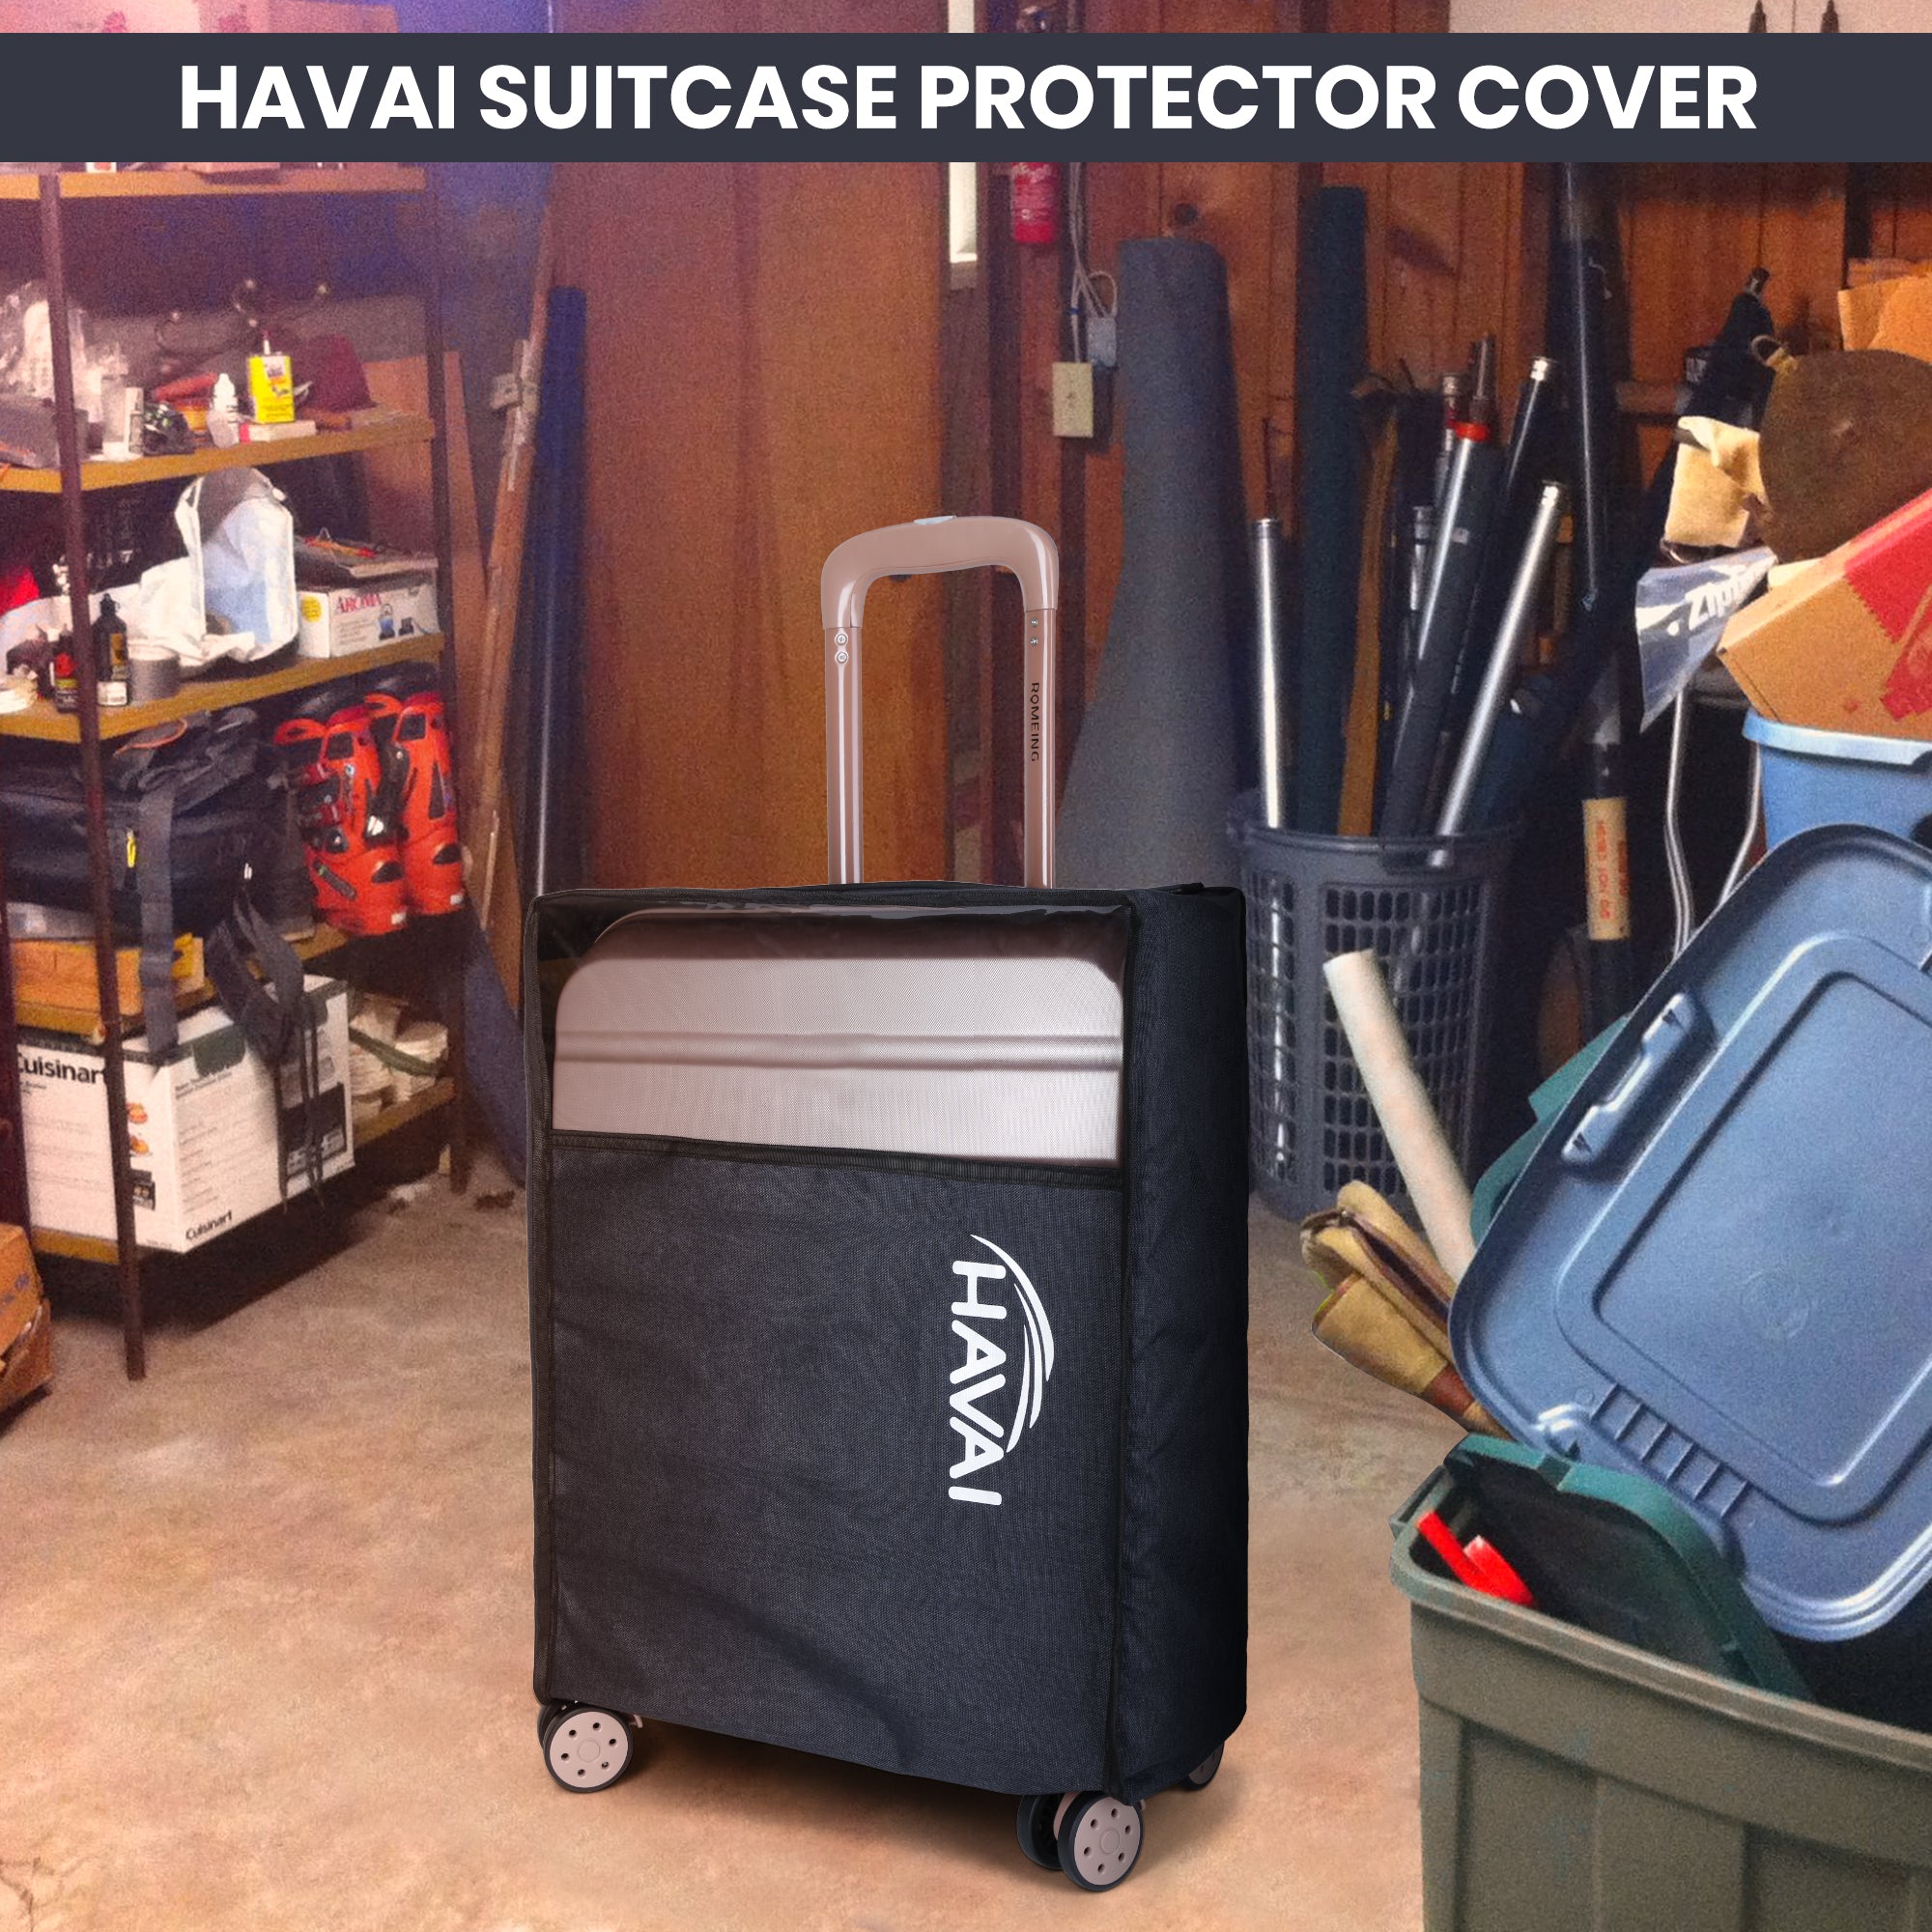 HAVAI Suitcase Storage Protector - Store your suitcase Safely (24 Inch), Navy Blue, Pack of 1